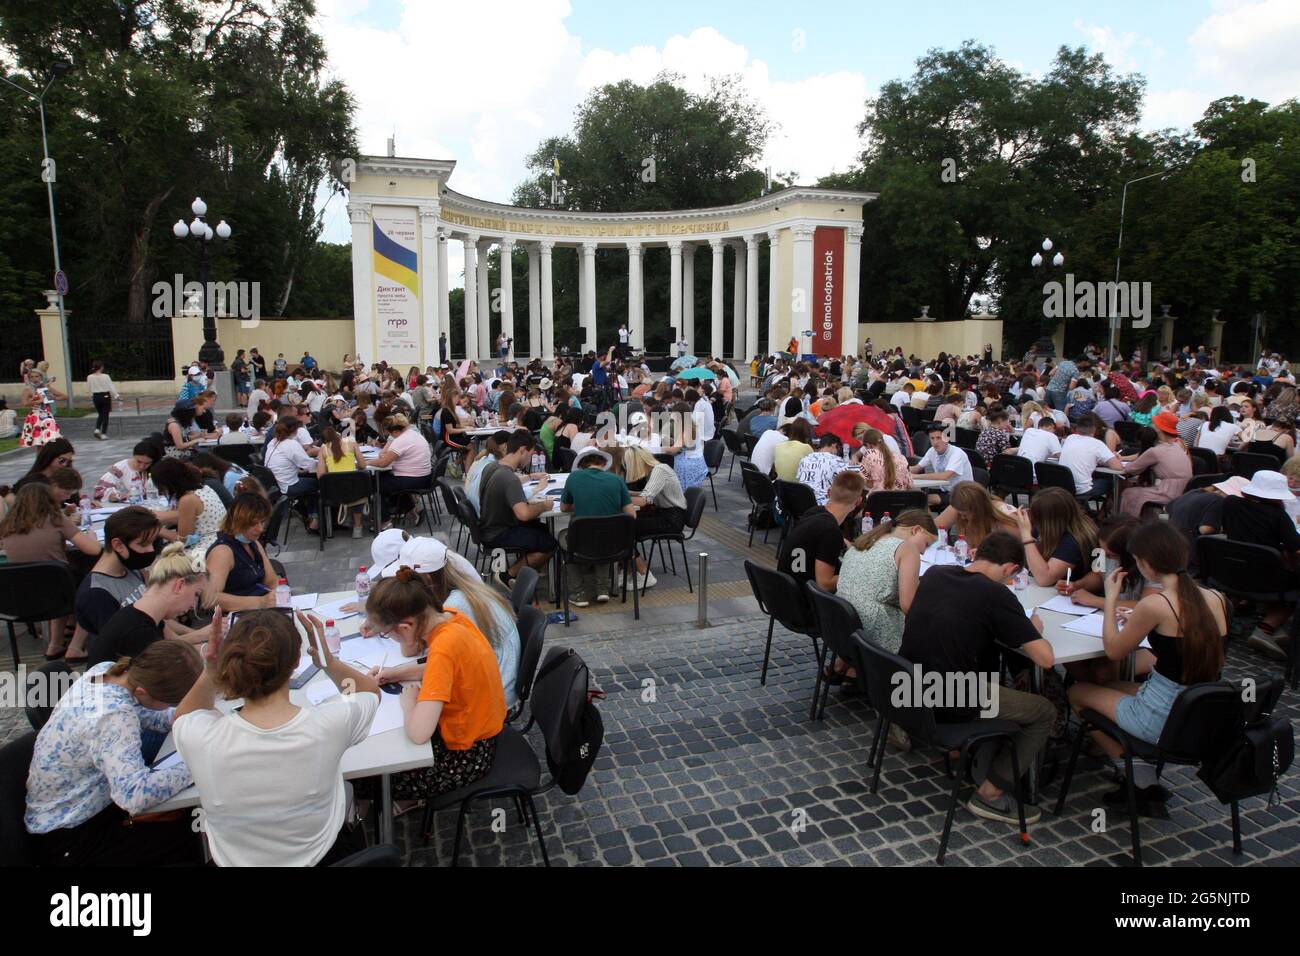 DNIPRO, UKRAINE - JUNE 28, 2021 - People do Ukrainian dictation outdoors in Tarasa Shevchenko Square in celebration of the 25th Consitution Day, Dnipr Stock Photo